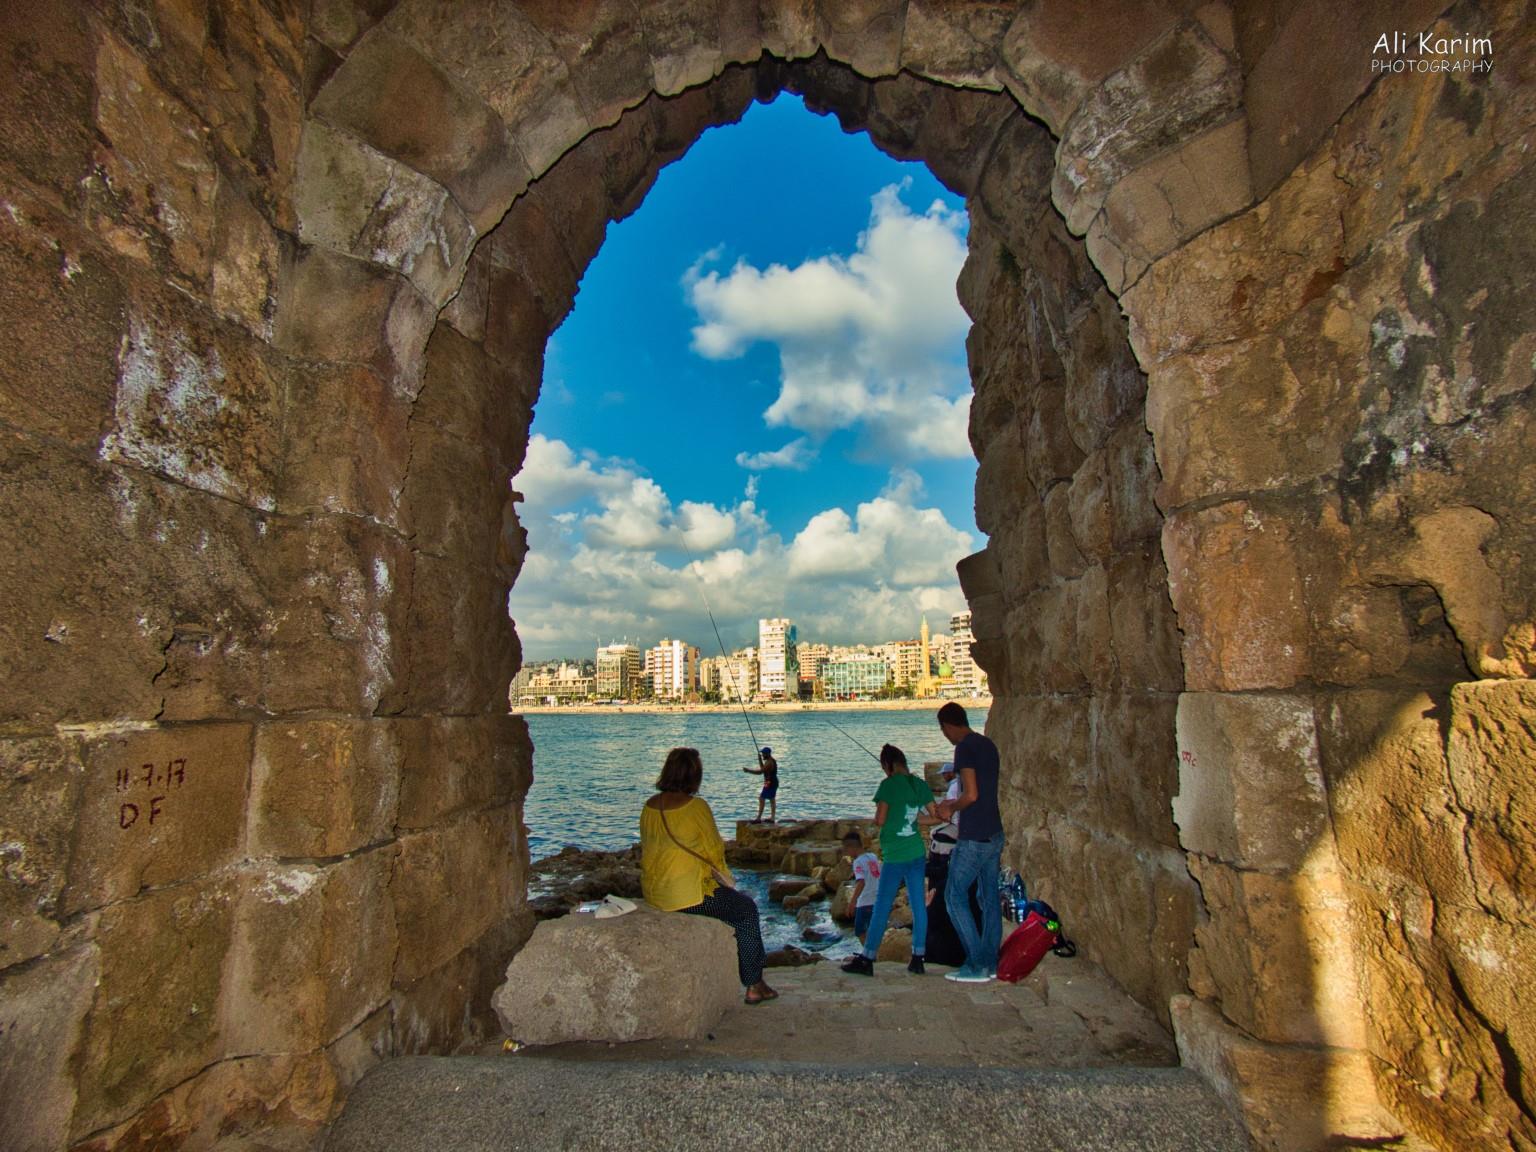 Sidon and Tyre Castle Alcove where the Syrian family was picnicking; ancient and modern Sidon